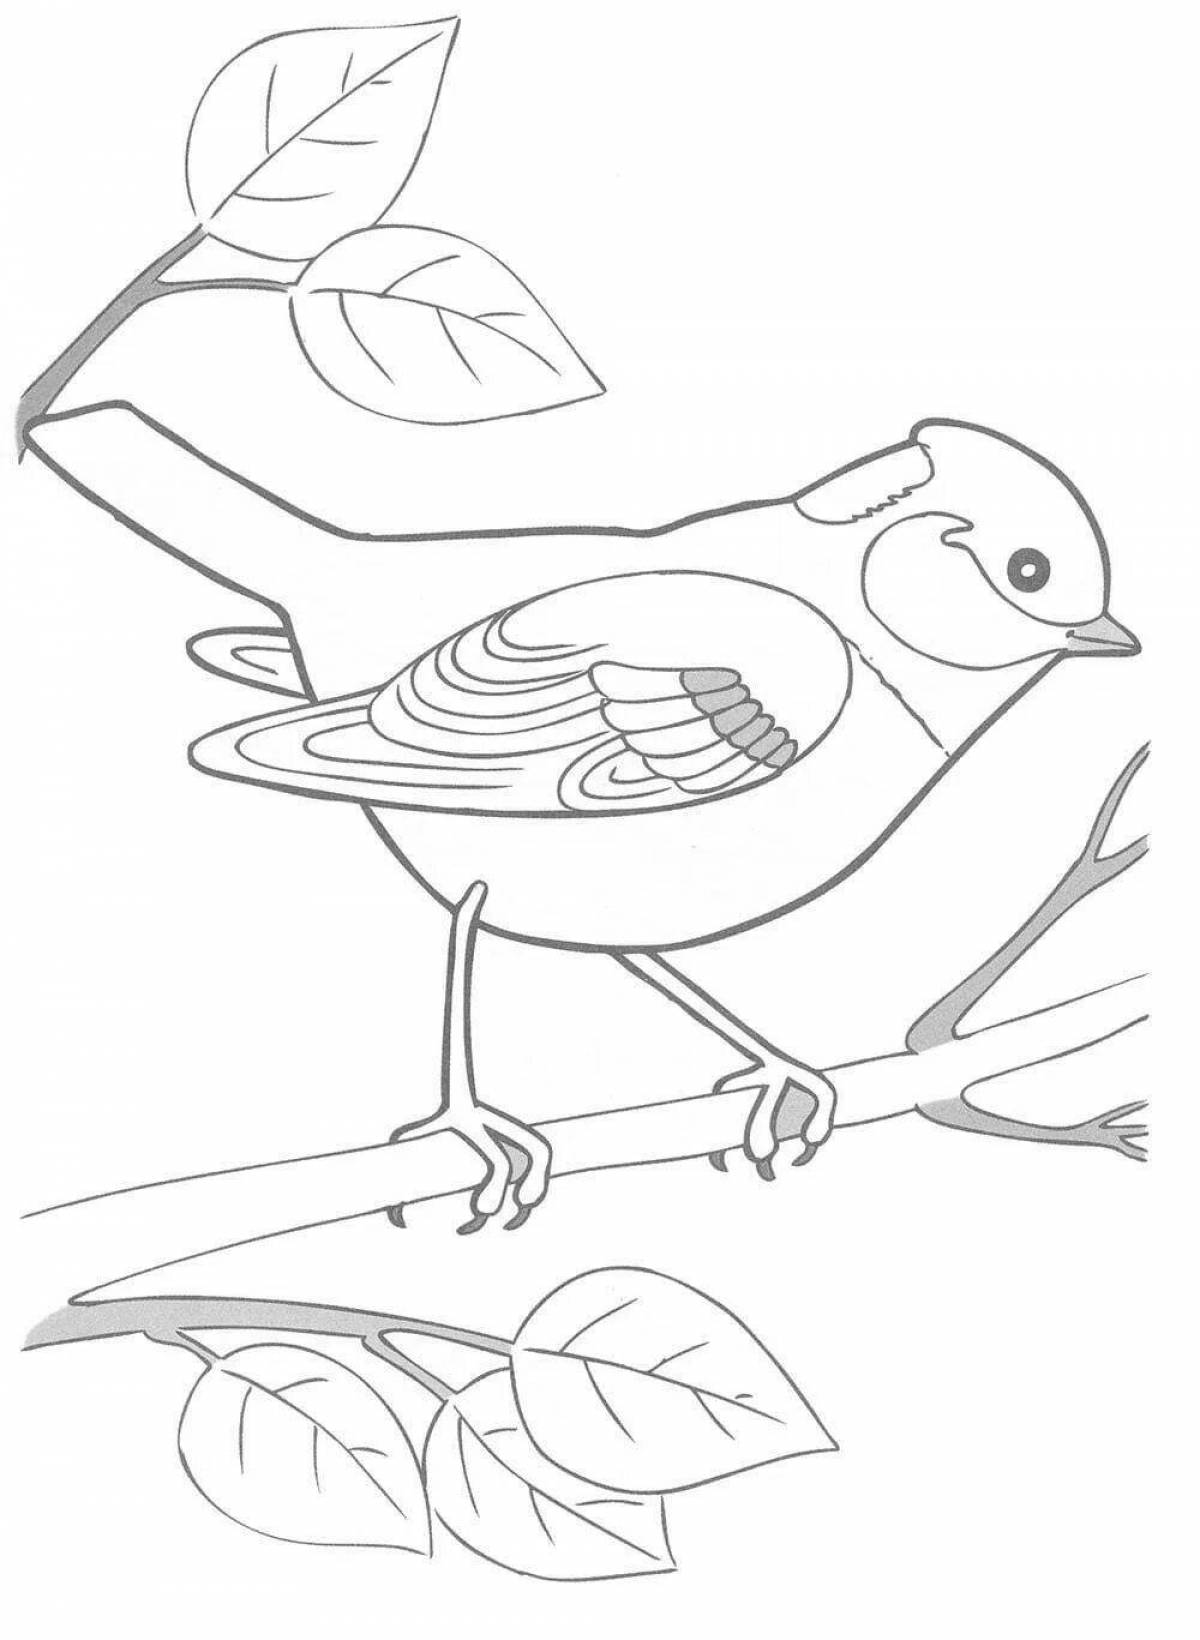 Ecstatic titmouse day coloring page